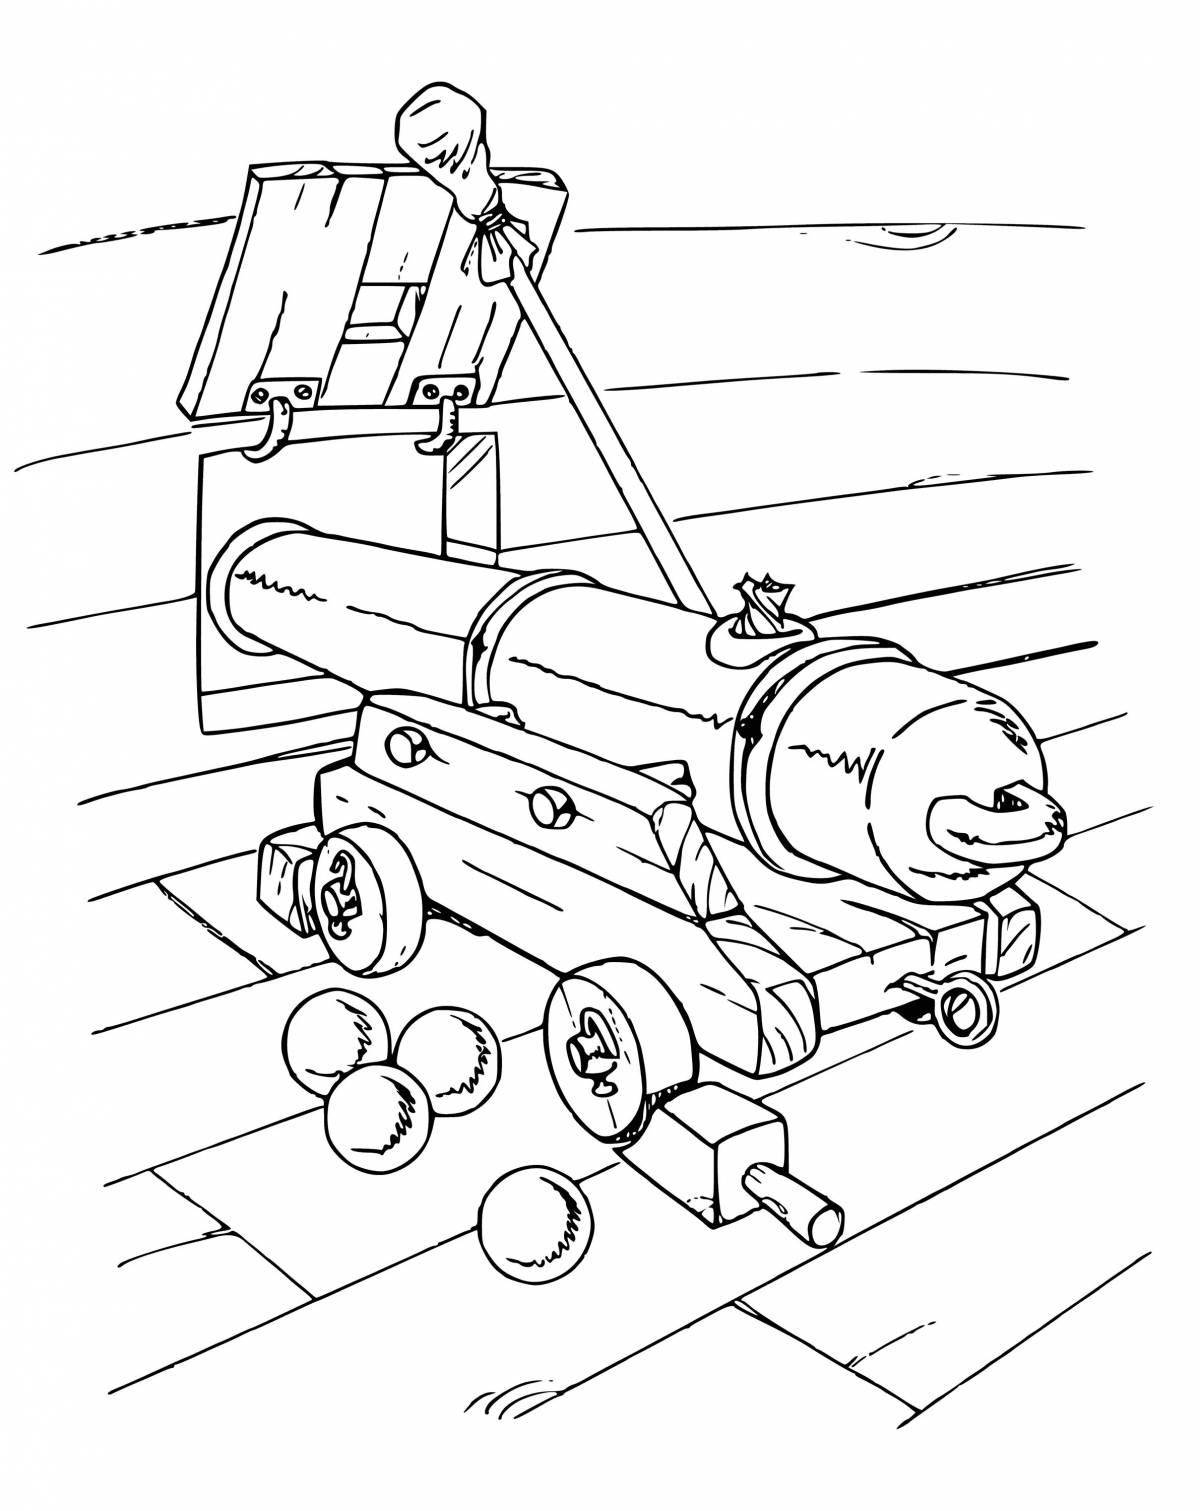 Famous gun coloring pages for boys